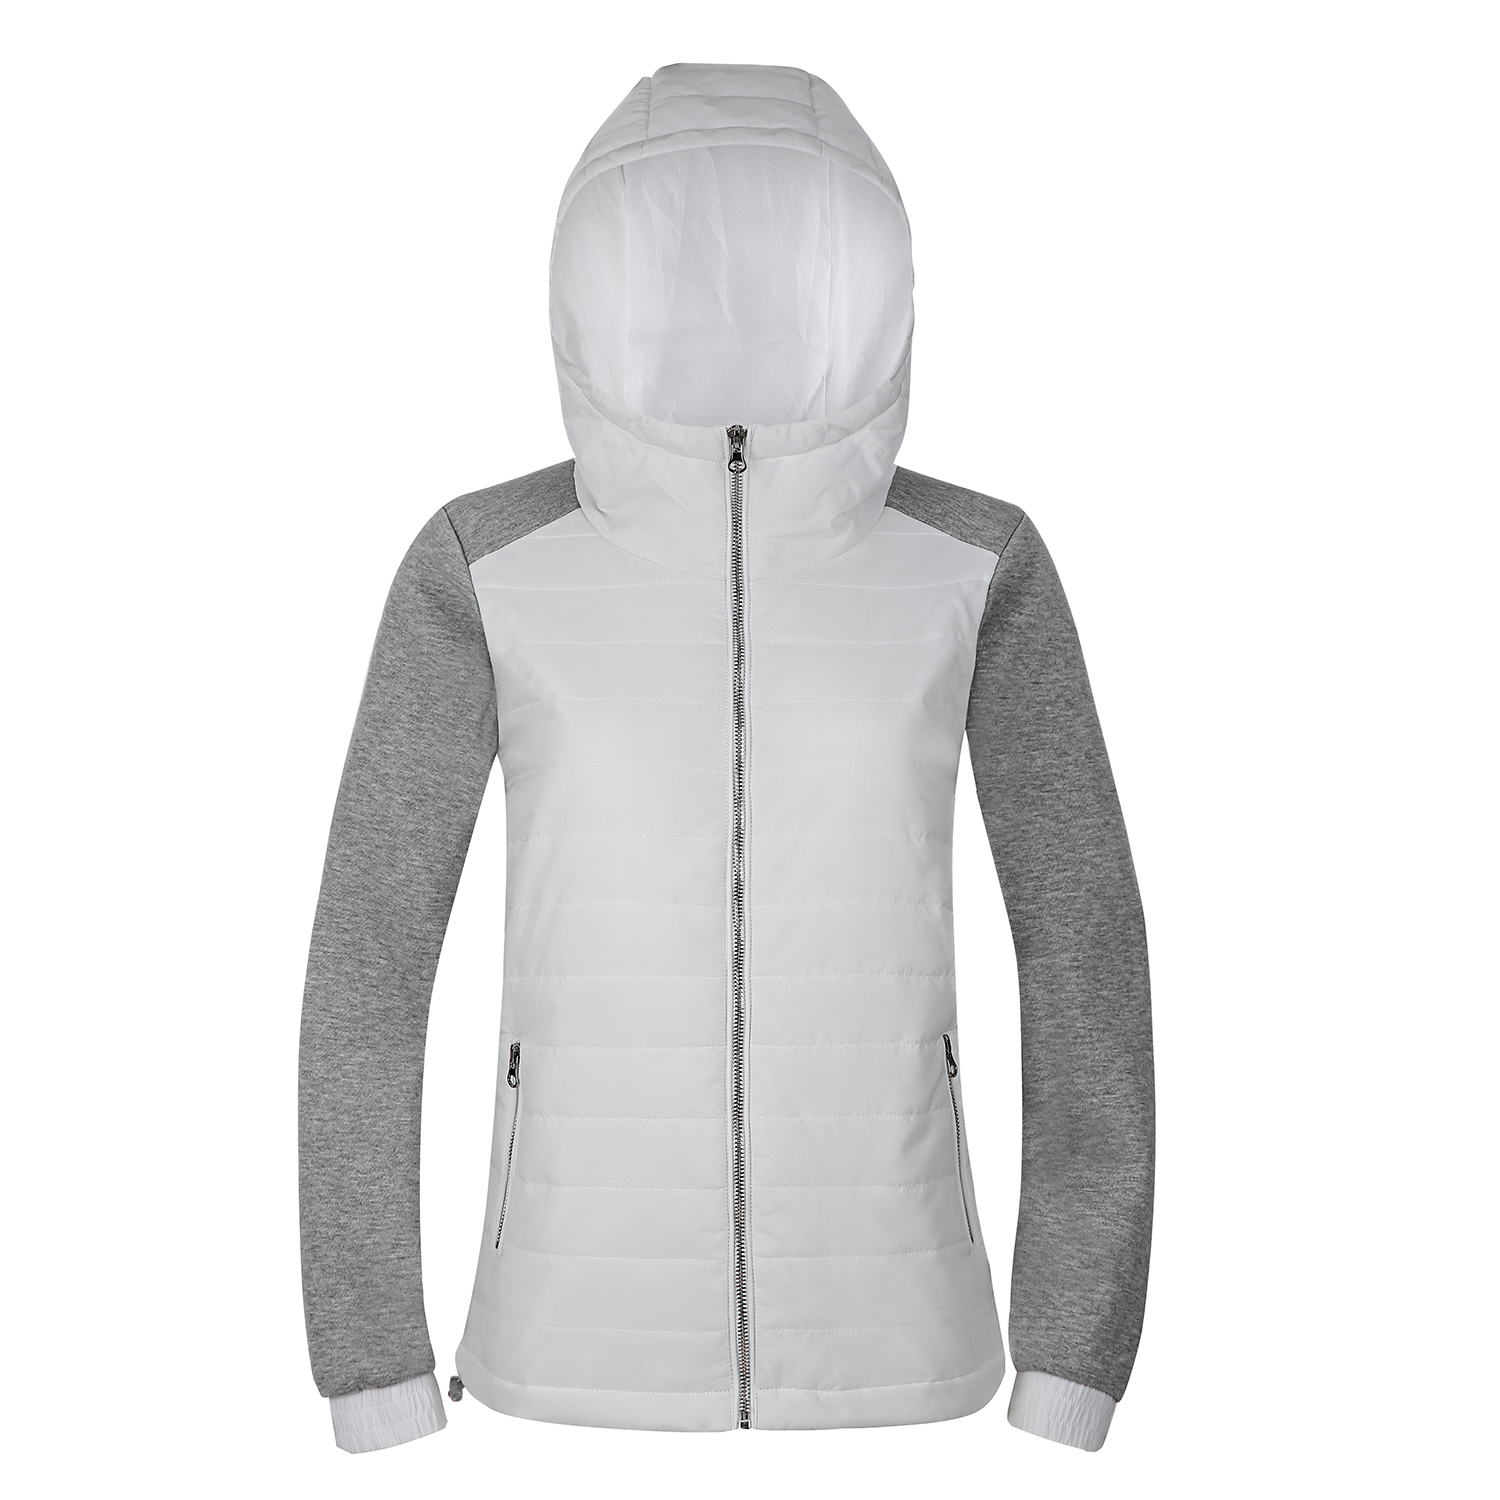 Best price for women's casual jacket with hood